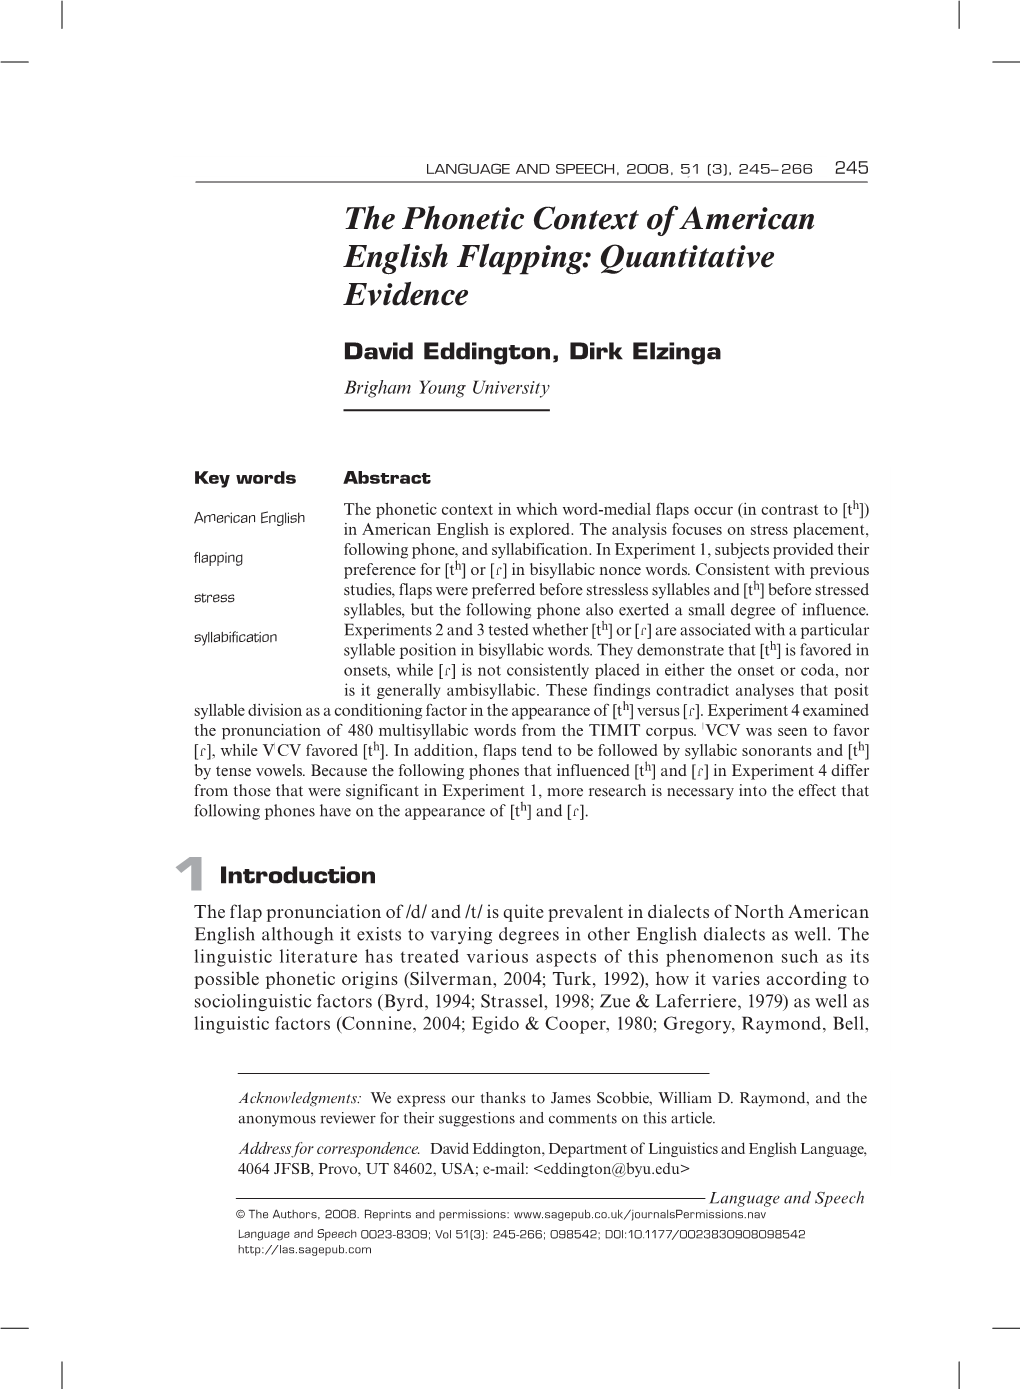 The Phonetic Context of American English Flapping: Quantitative Evidence